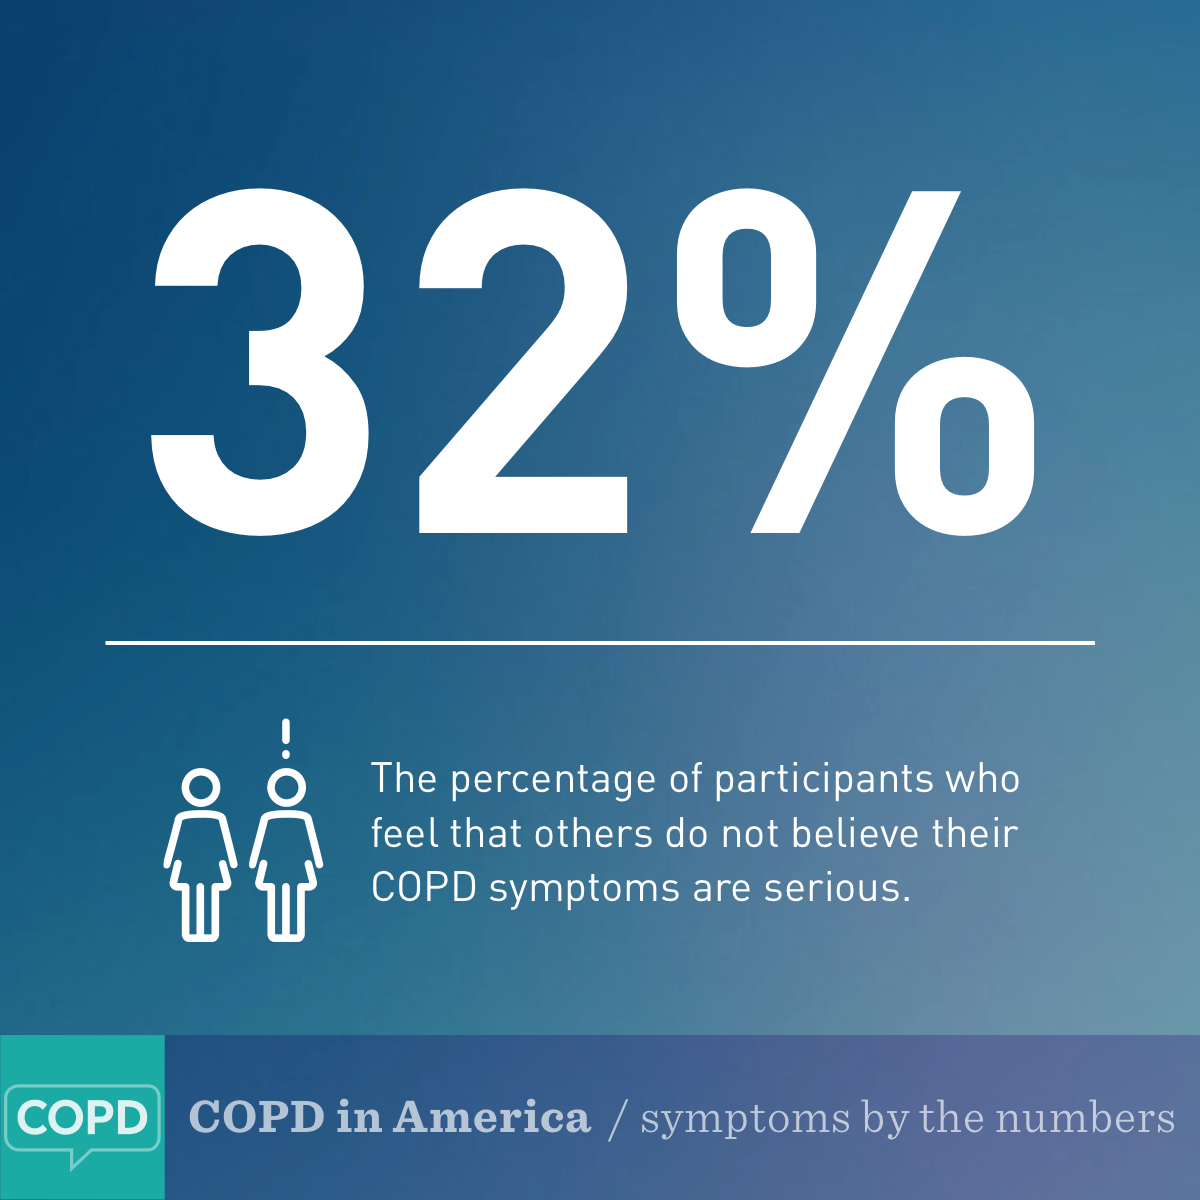 what are the 4 stages of copd?